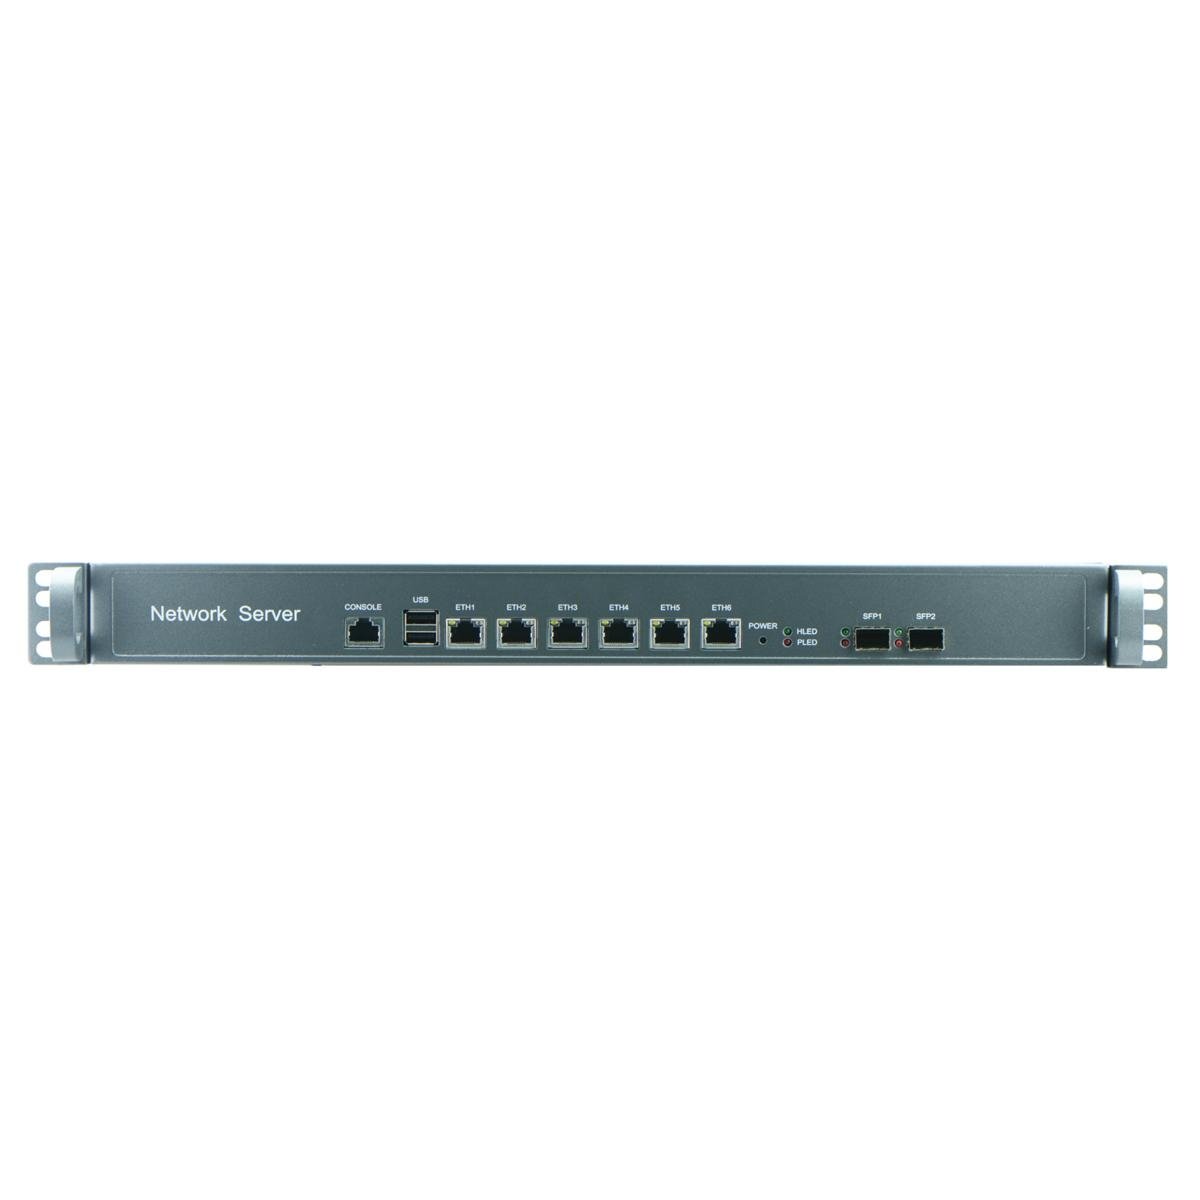 Intel H67 1U Industrial Rackmount Barebone for Network Security with 6Nic, 2SFP  2